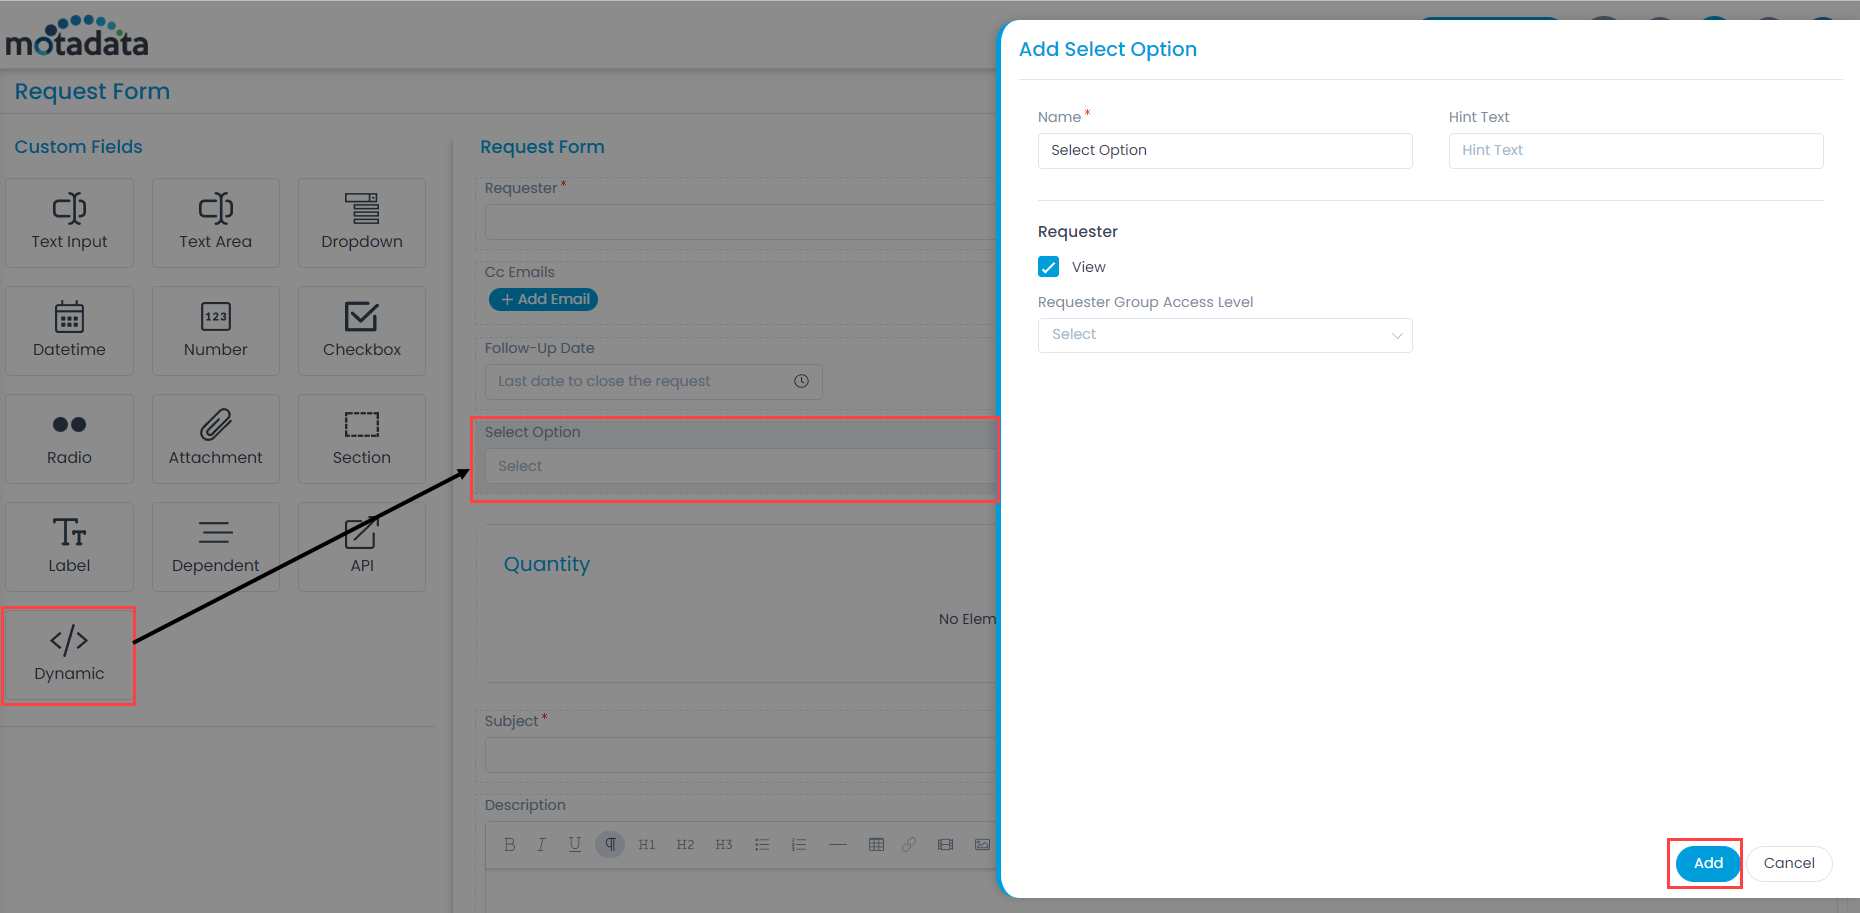 Adding a Dynamic Field to the Request Form